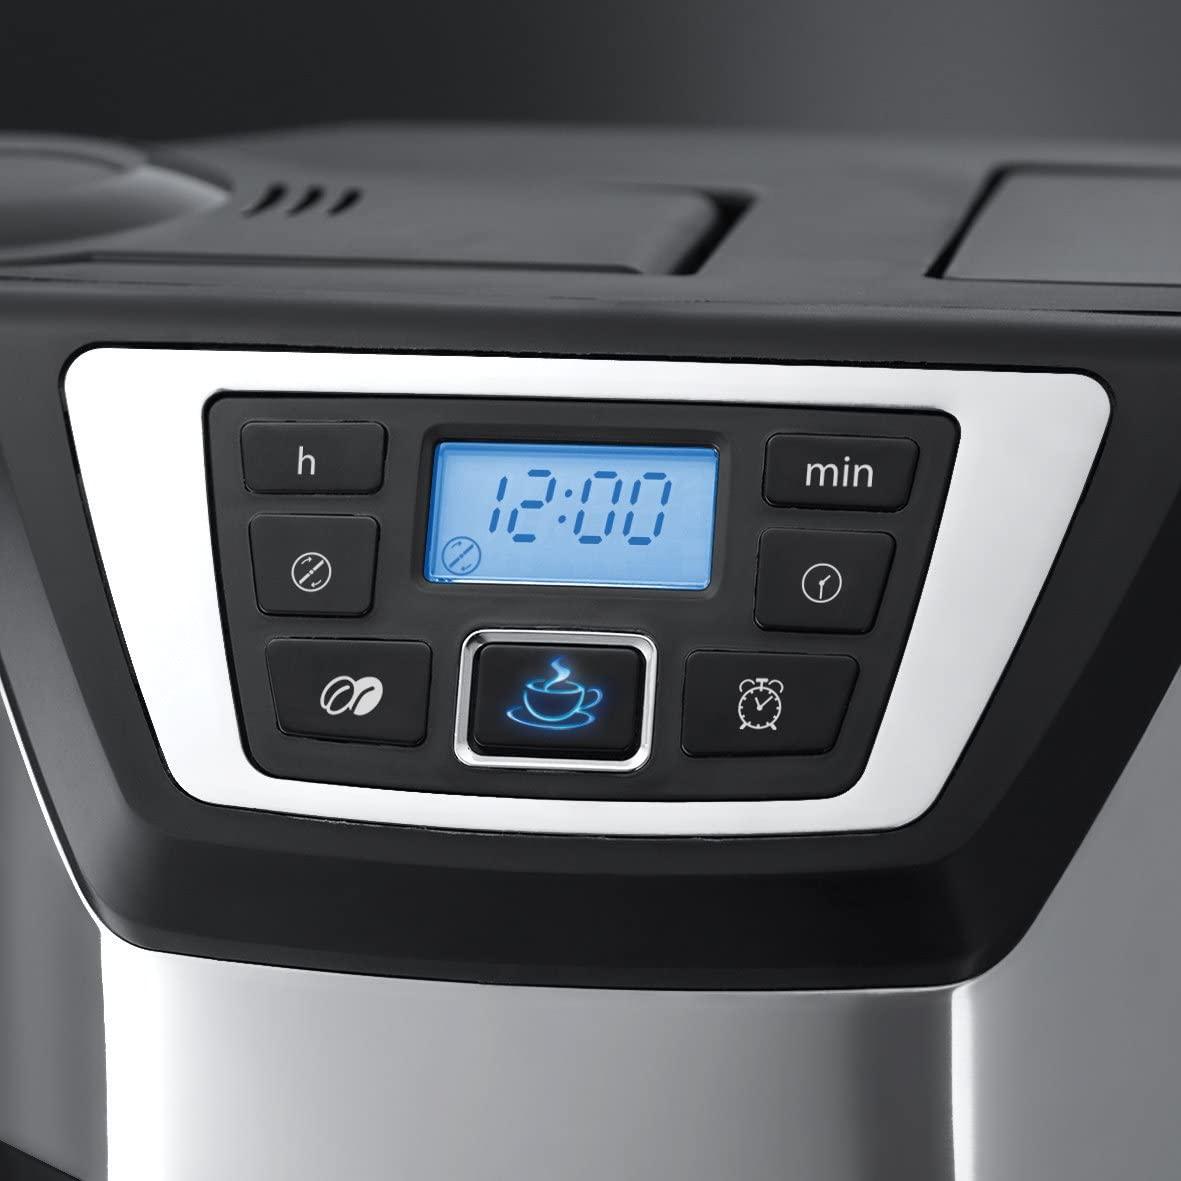 Russell Hobbs, Grind and Brew Coffee Maker, | 22000 - Peter Murphy Lighting & Electrical Ltd